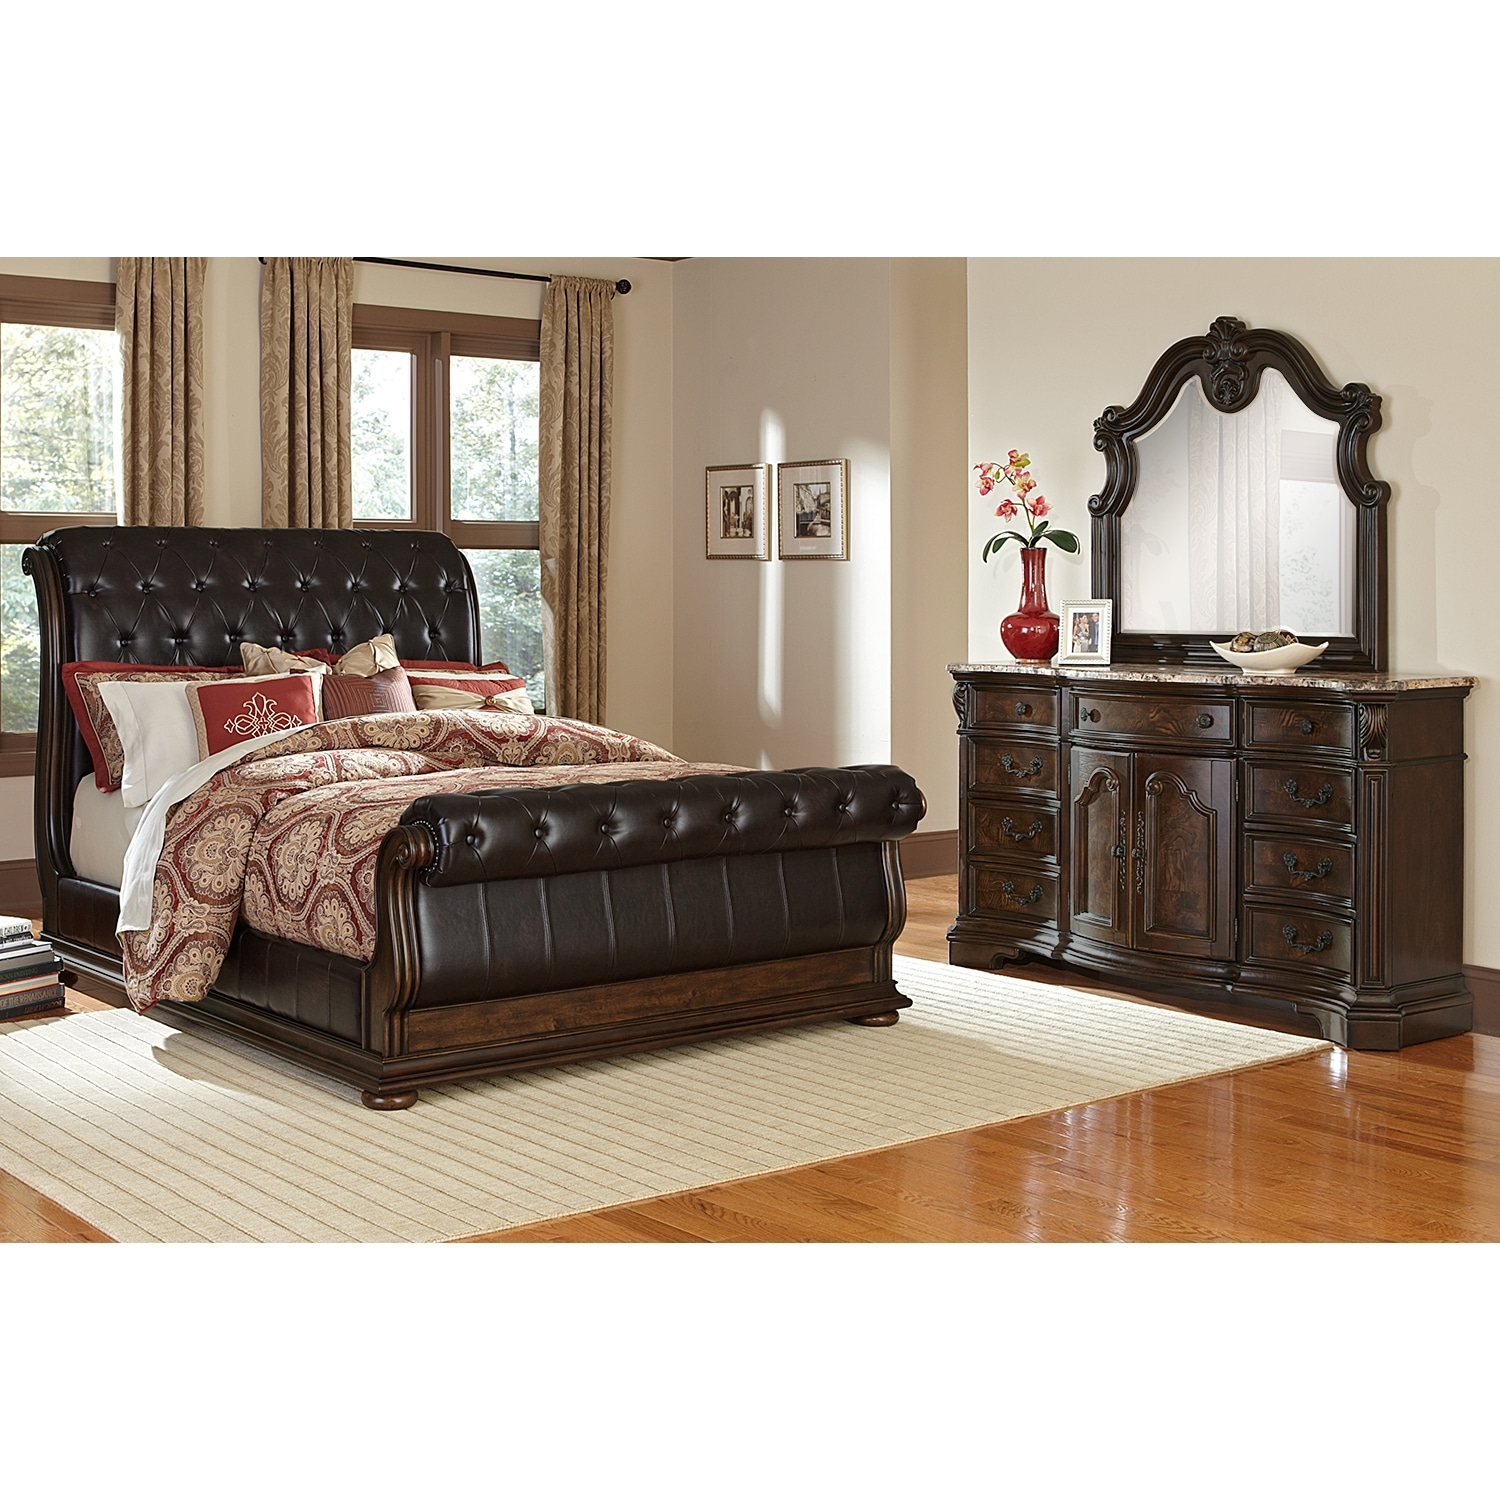 Monticello 5 Piece Upholstered Sleigh Bedroom Setwith Dresser And Mirror in size 1500 X 1500